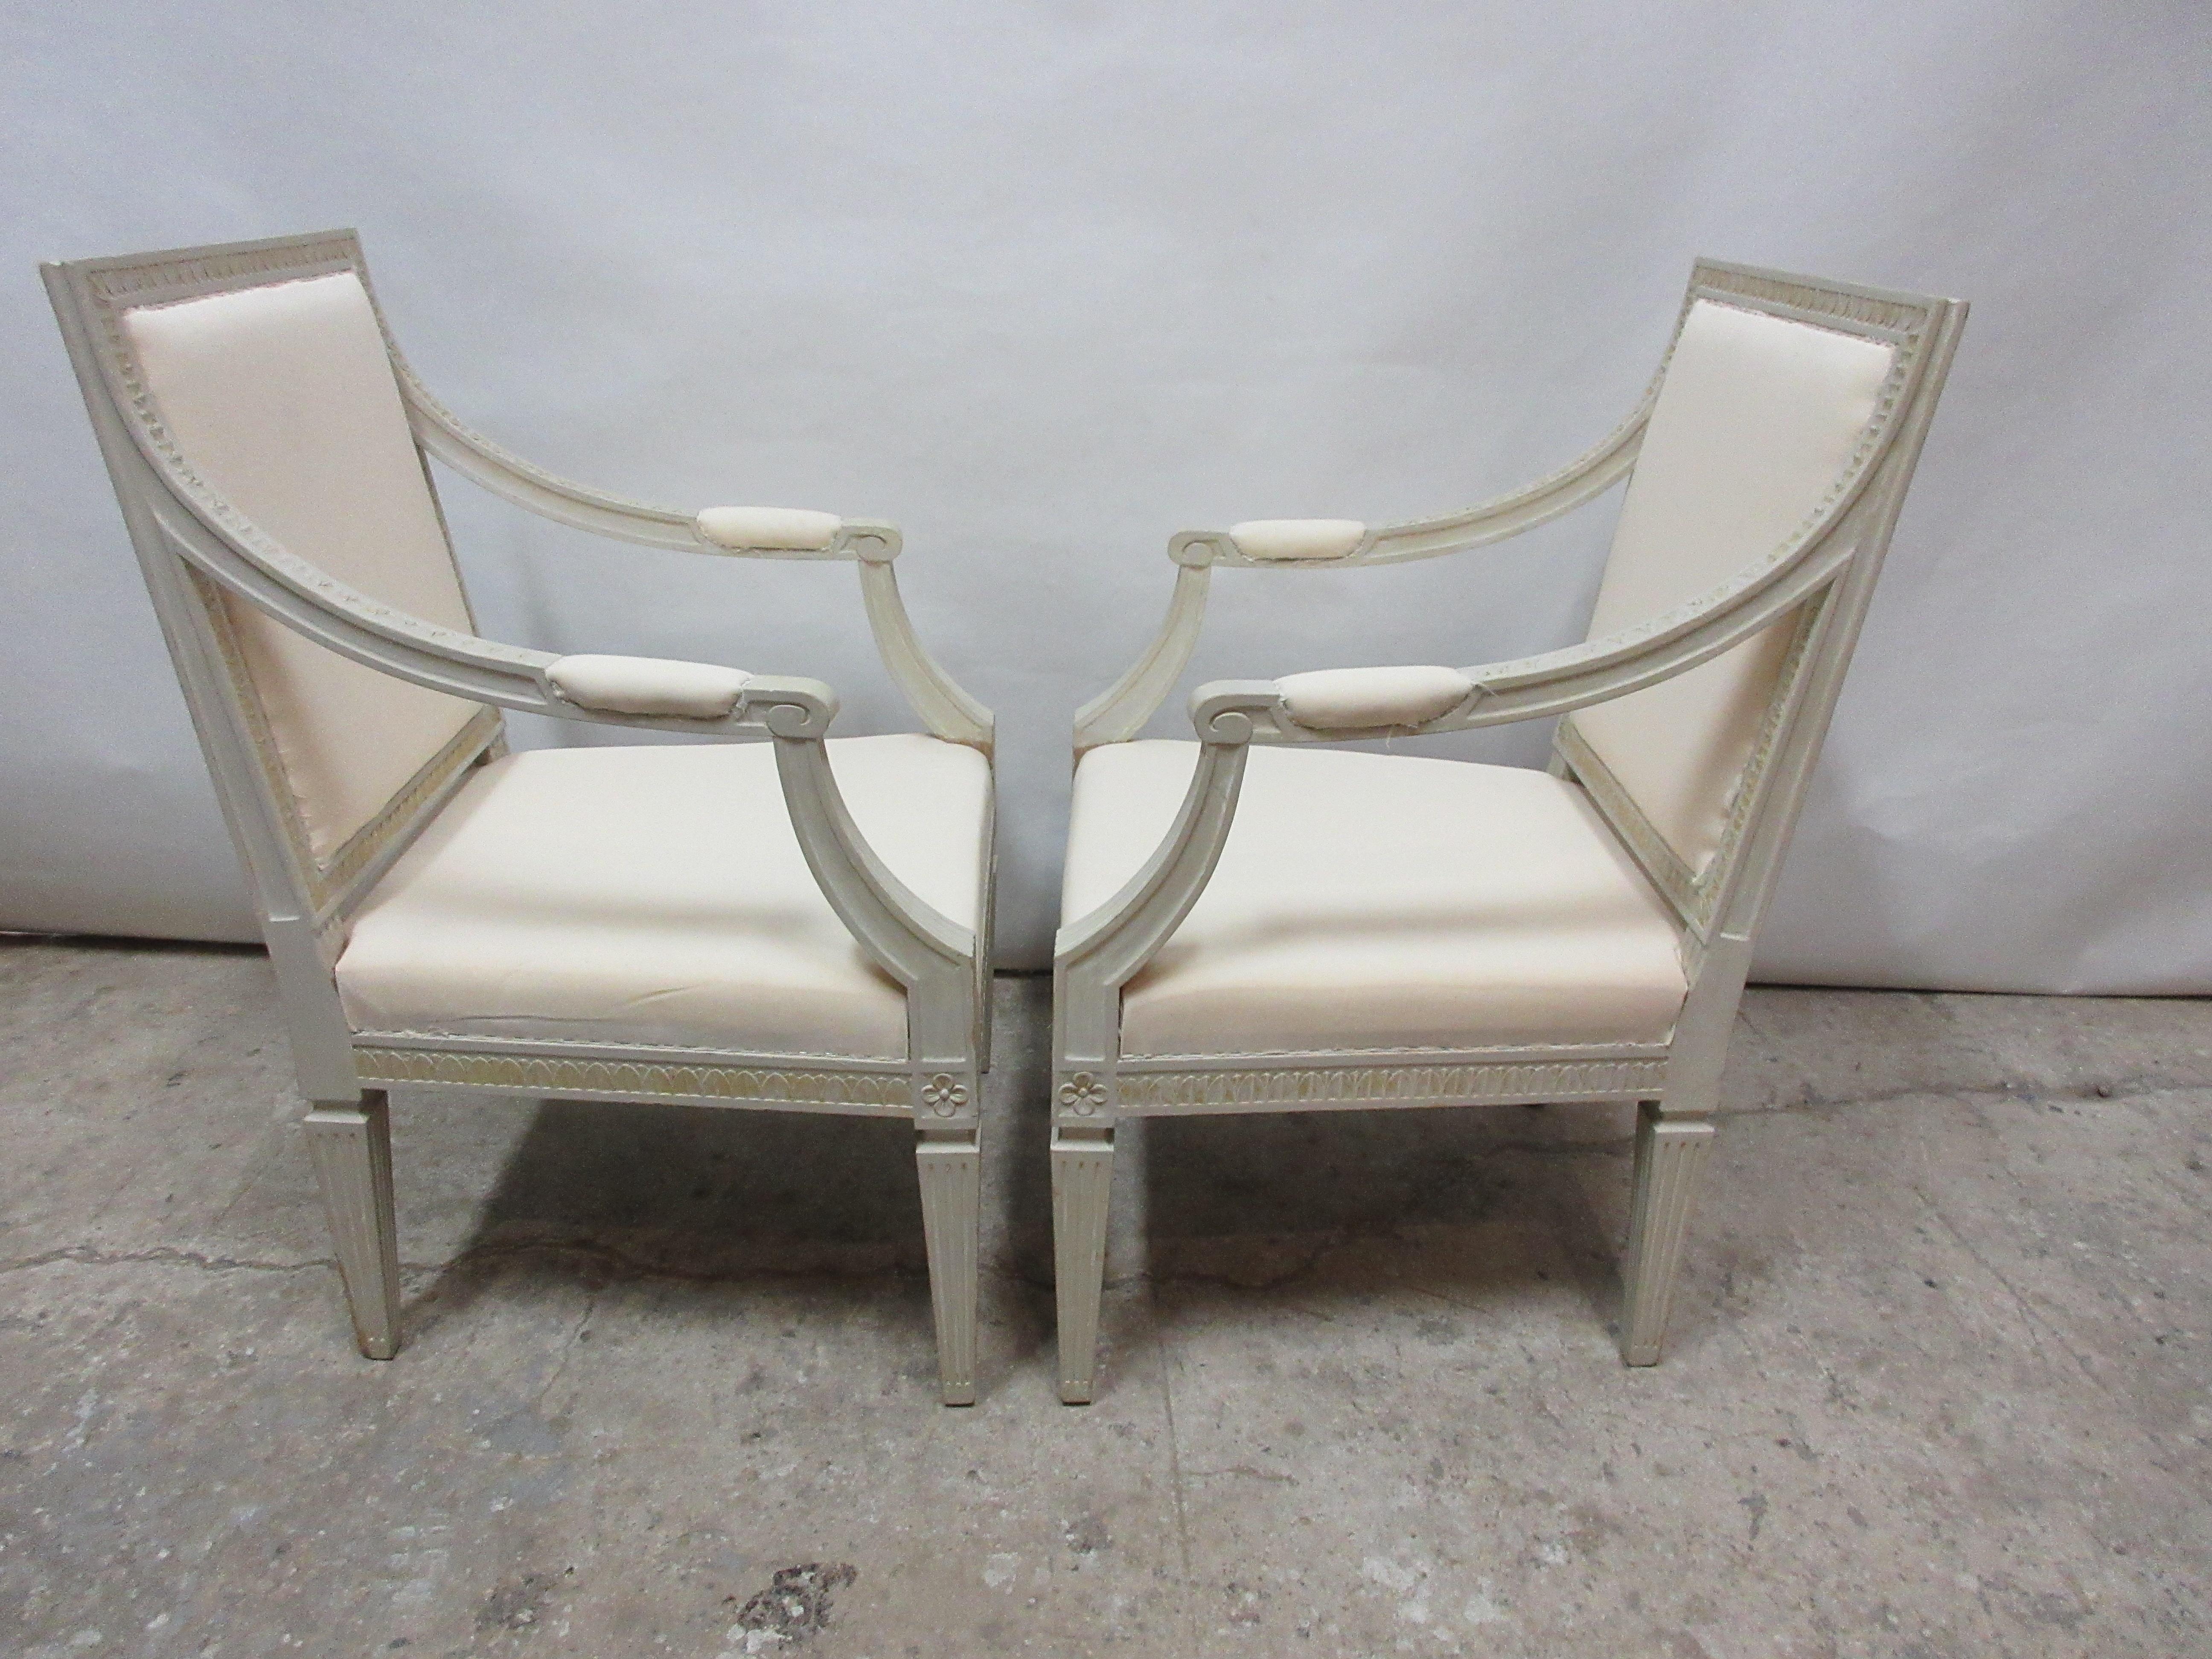 2 original paint Swedish Gustavian armchairs. They have been restored and repainted with milk paints 